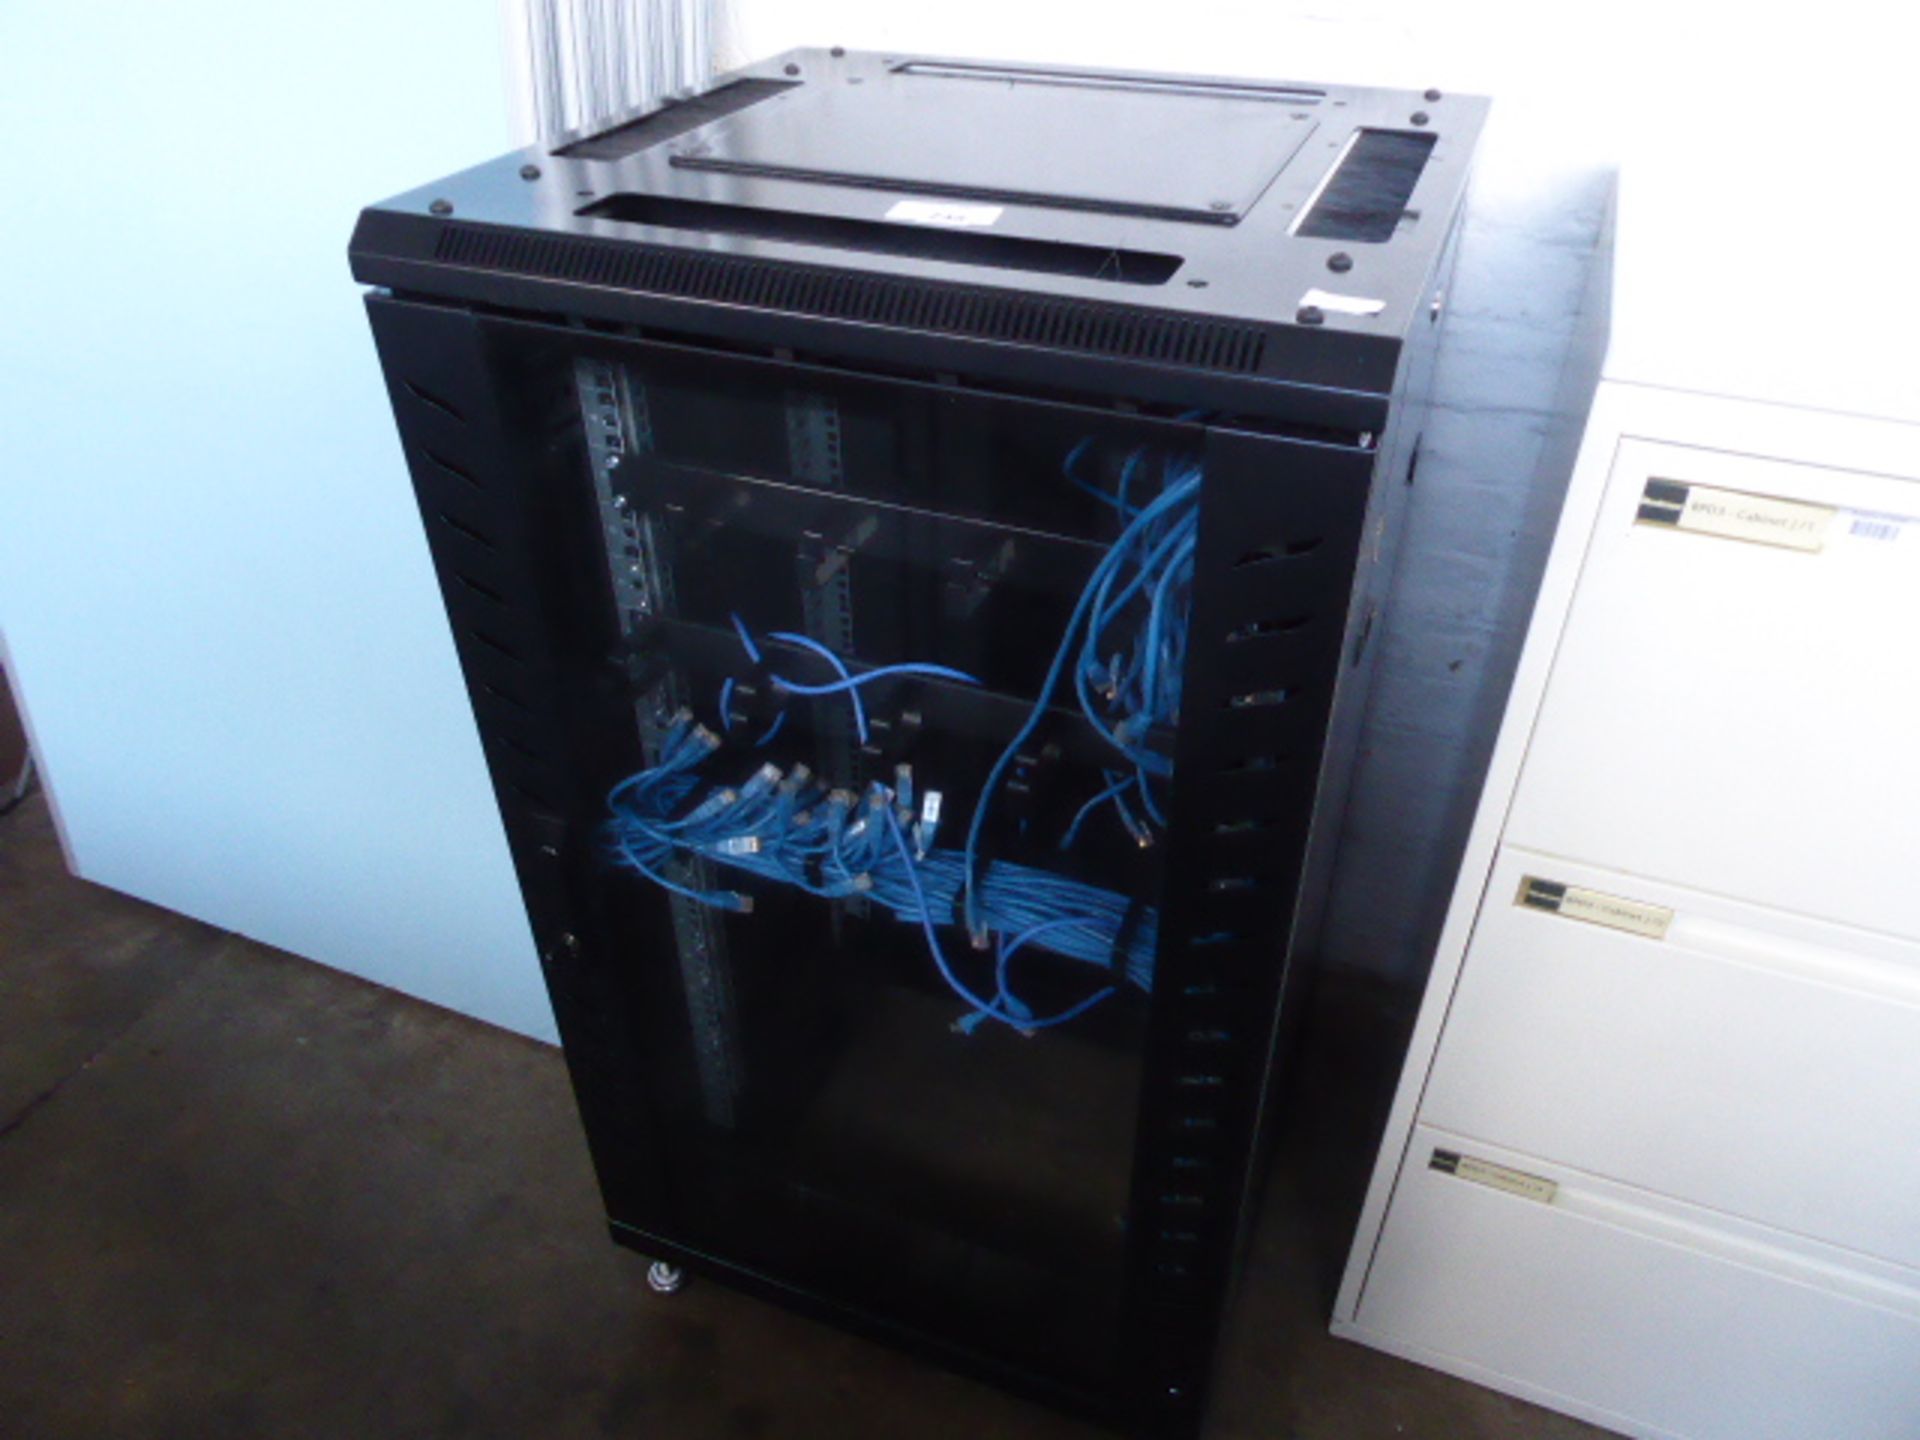 60cm comms cabinet with network cables - Image 2 of 3